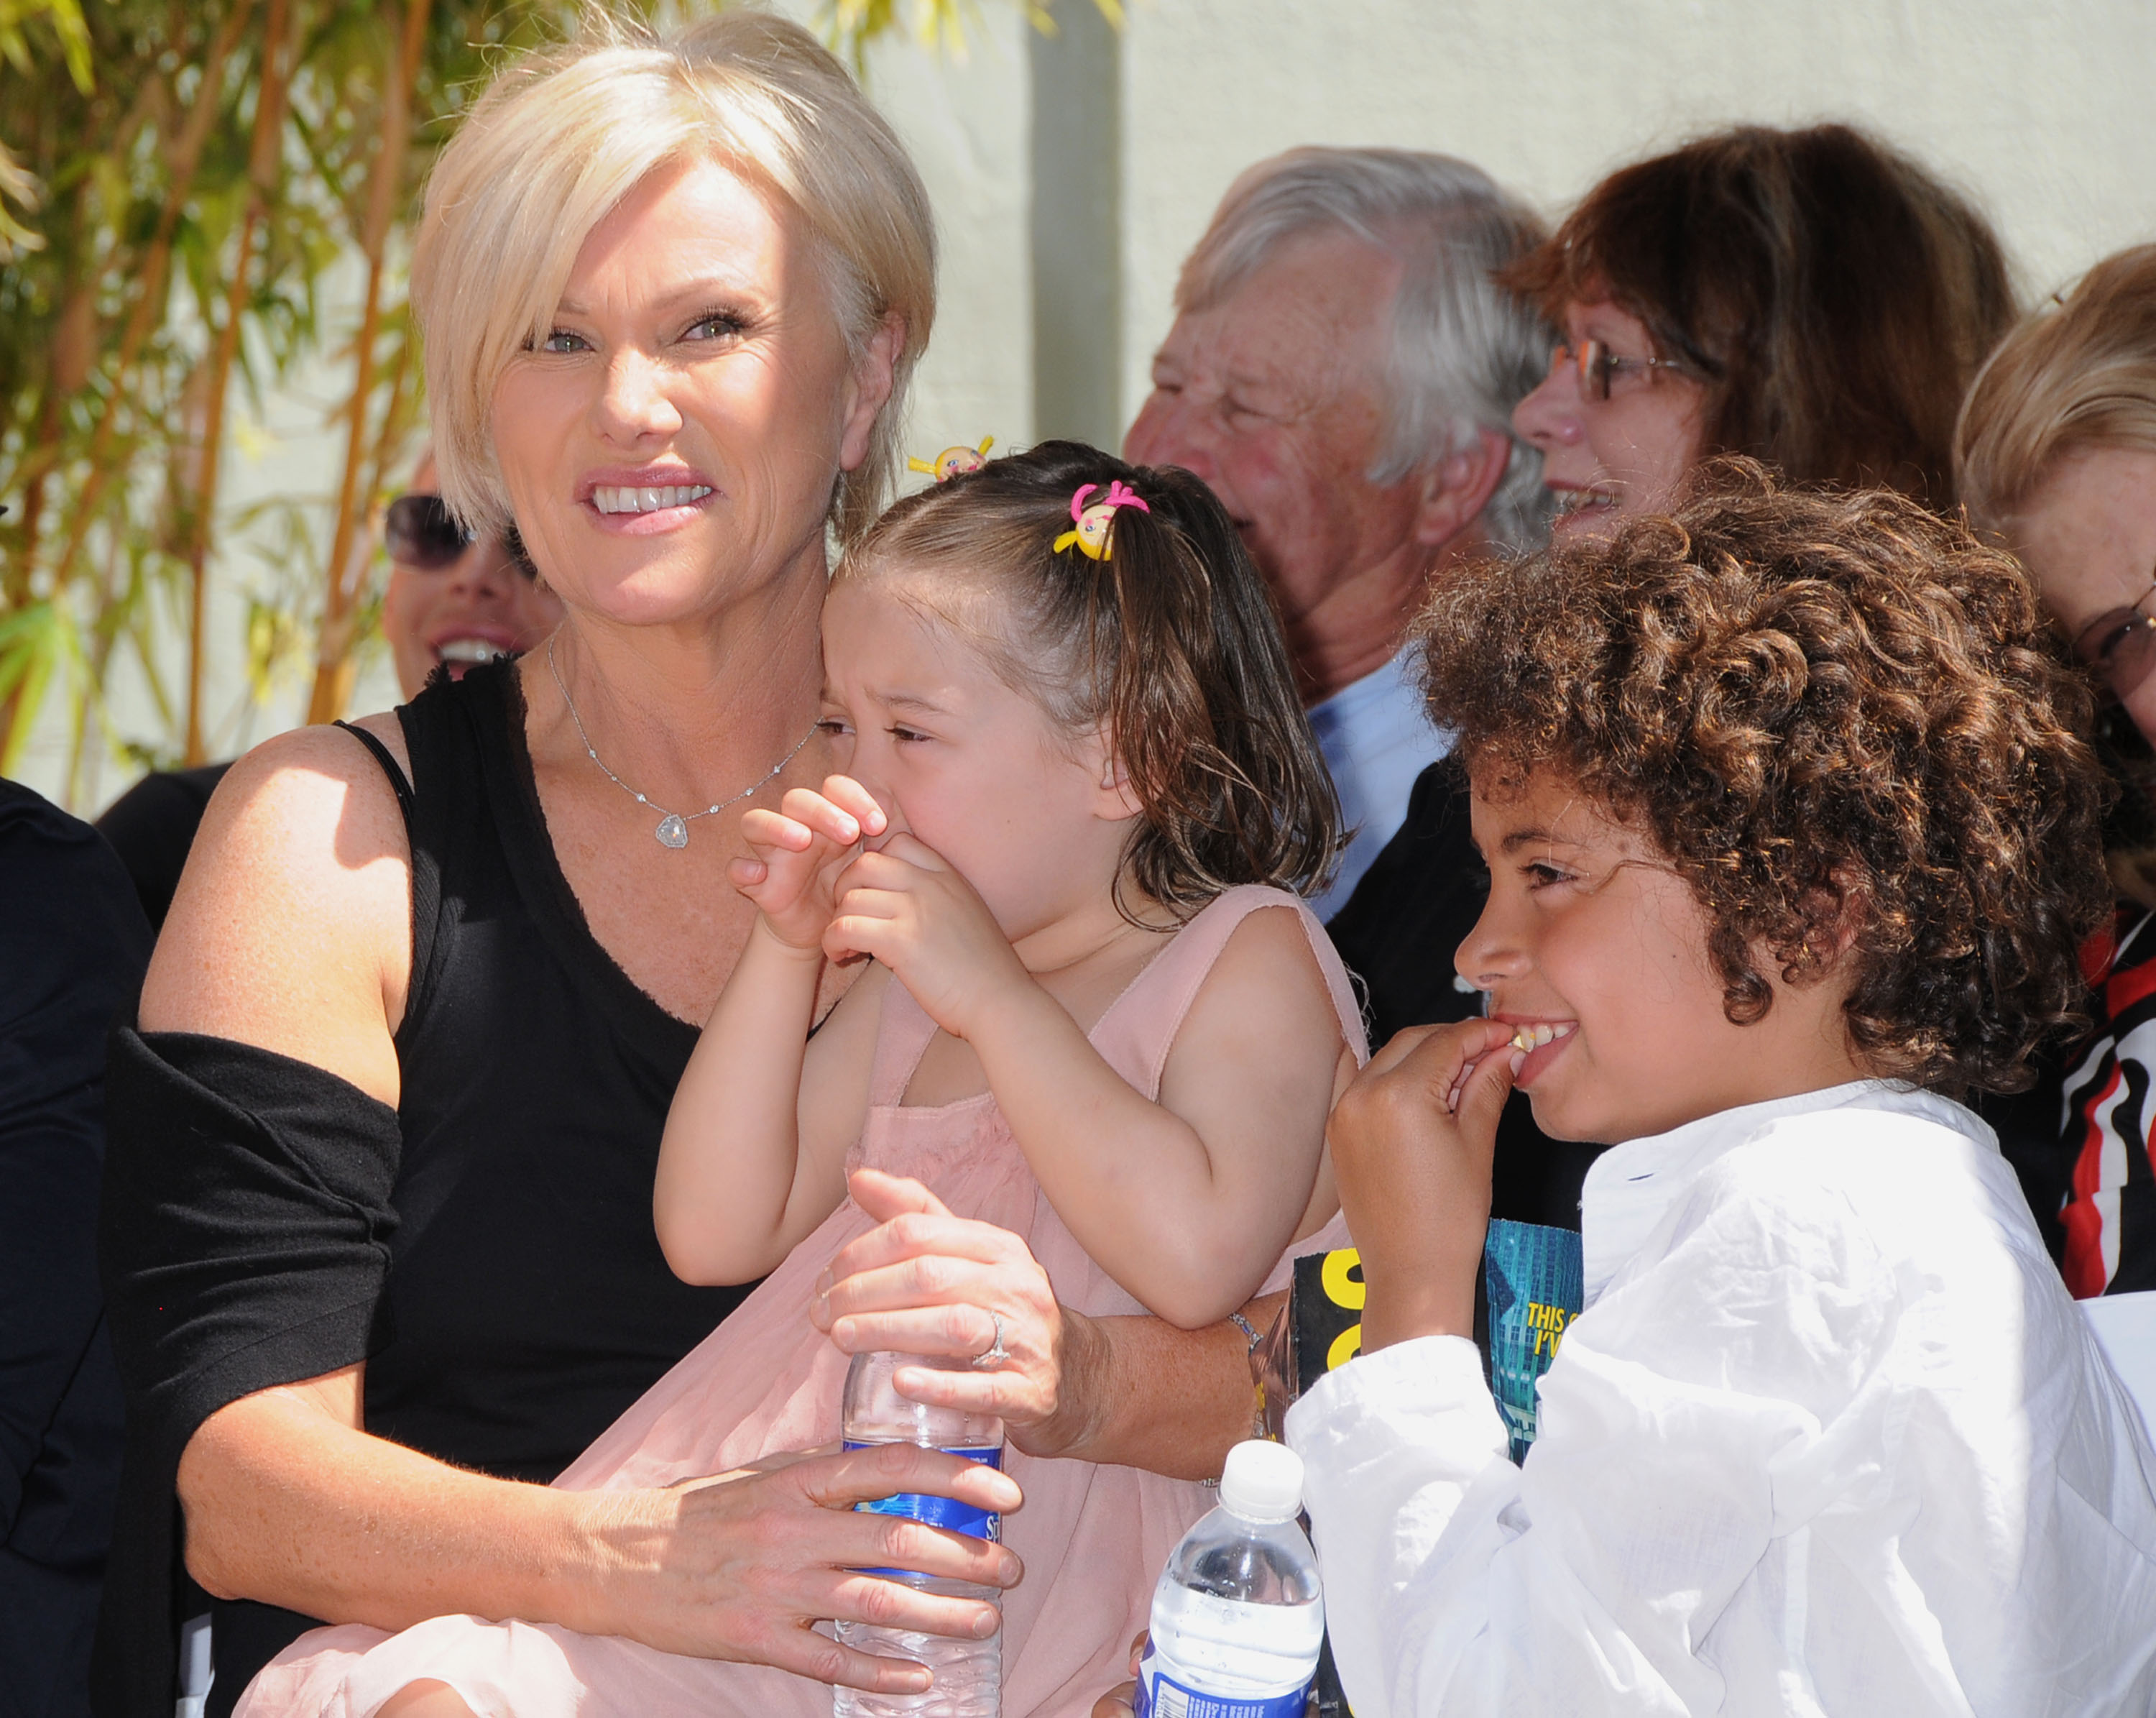 Deborra-Lee Furness, Ava, and Oscar attend the handprint and footprint ceremony honoring Hugh Jackman in Hollywood, California on April 21, 2009 | Source: Getty Images